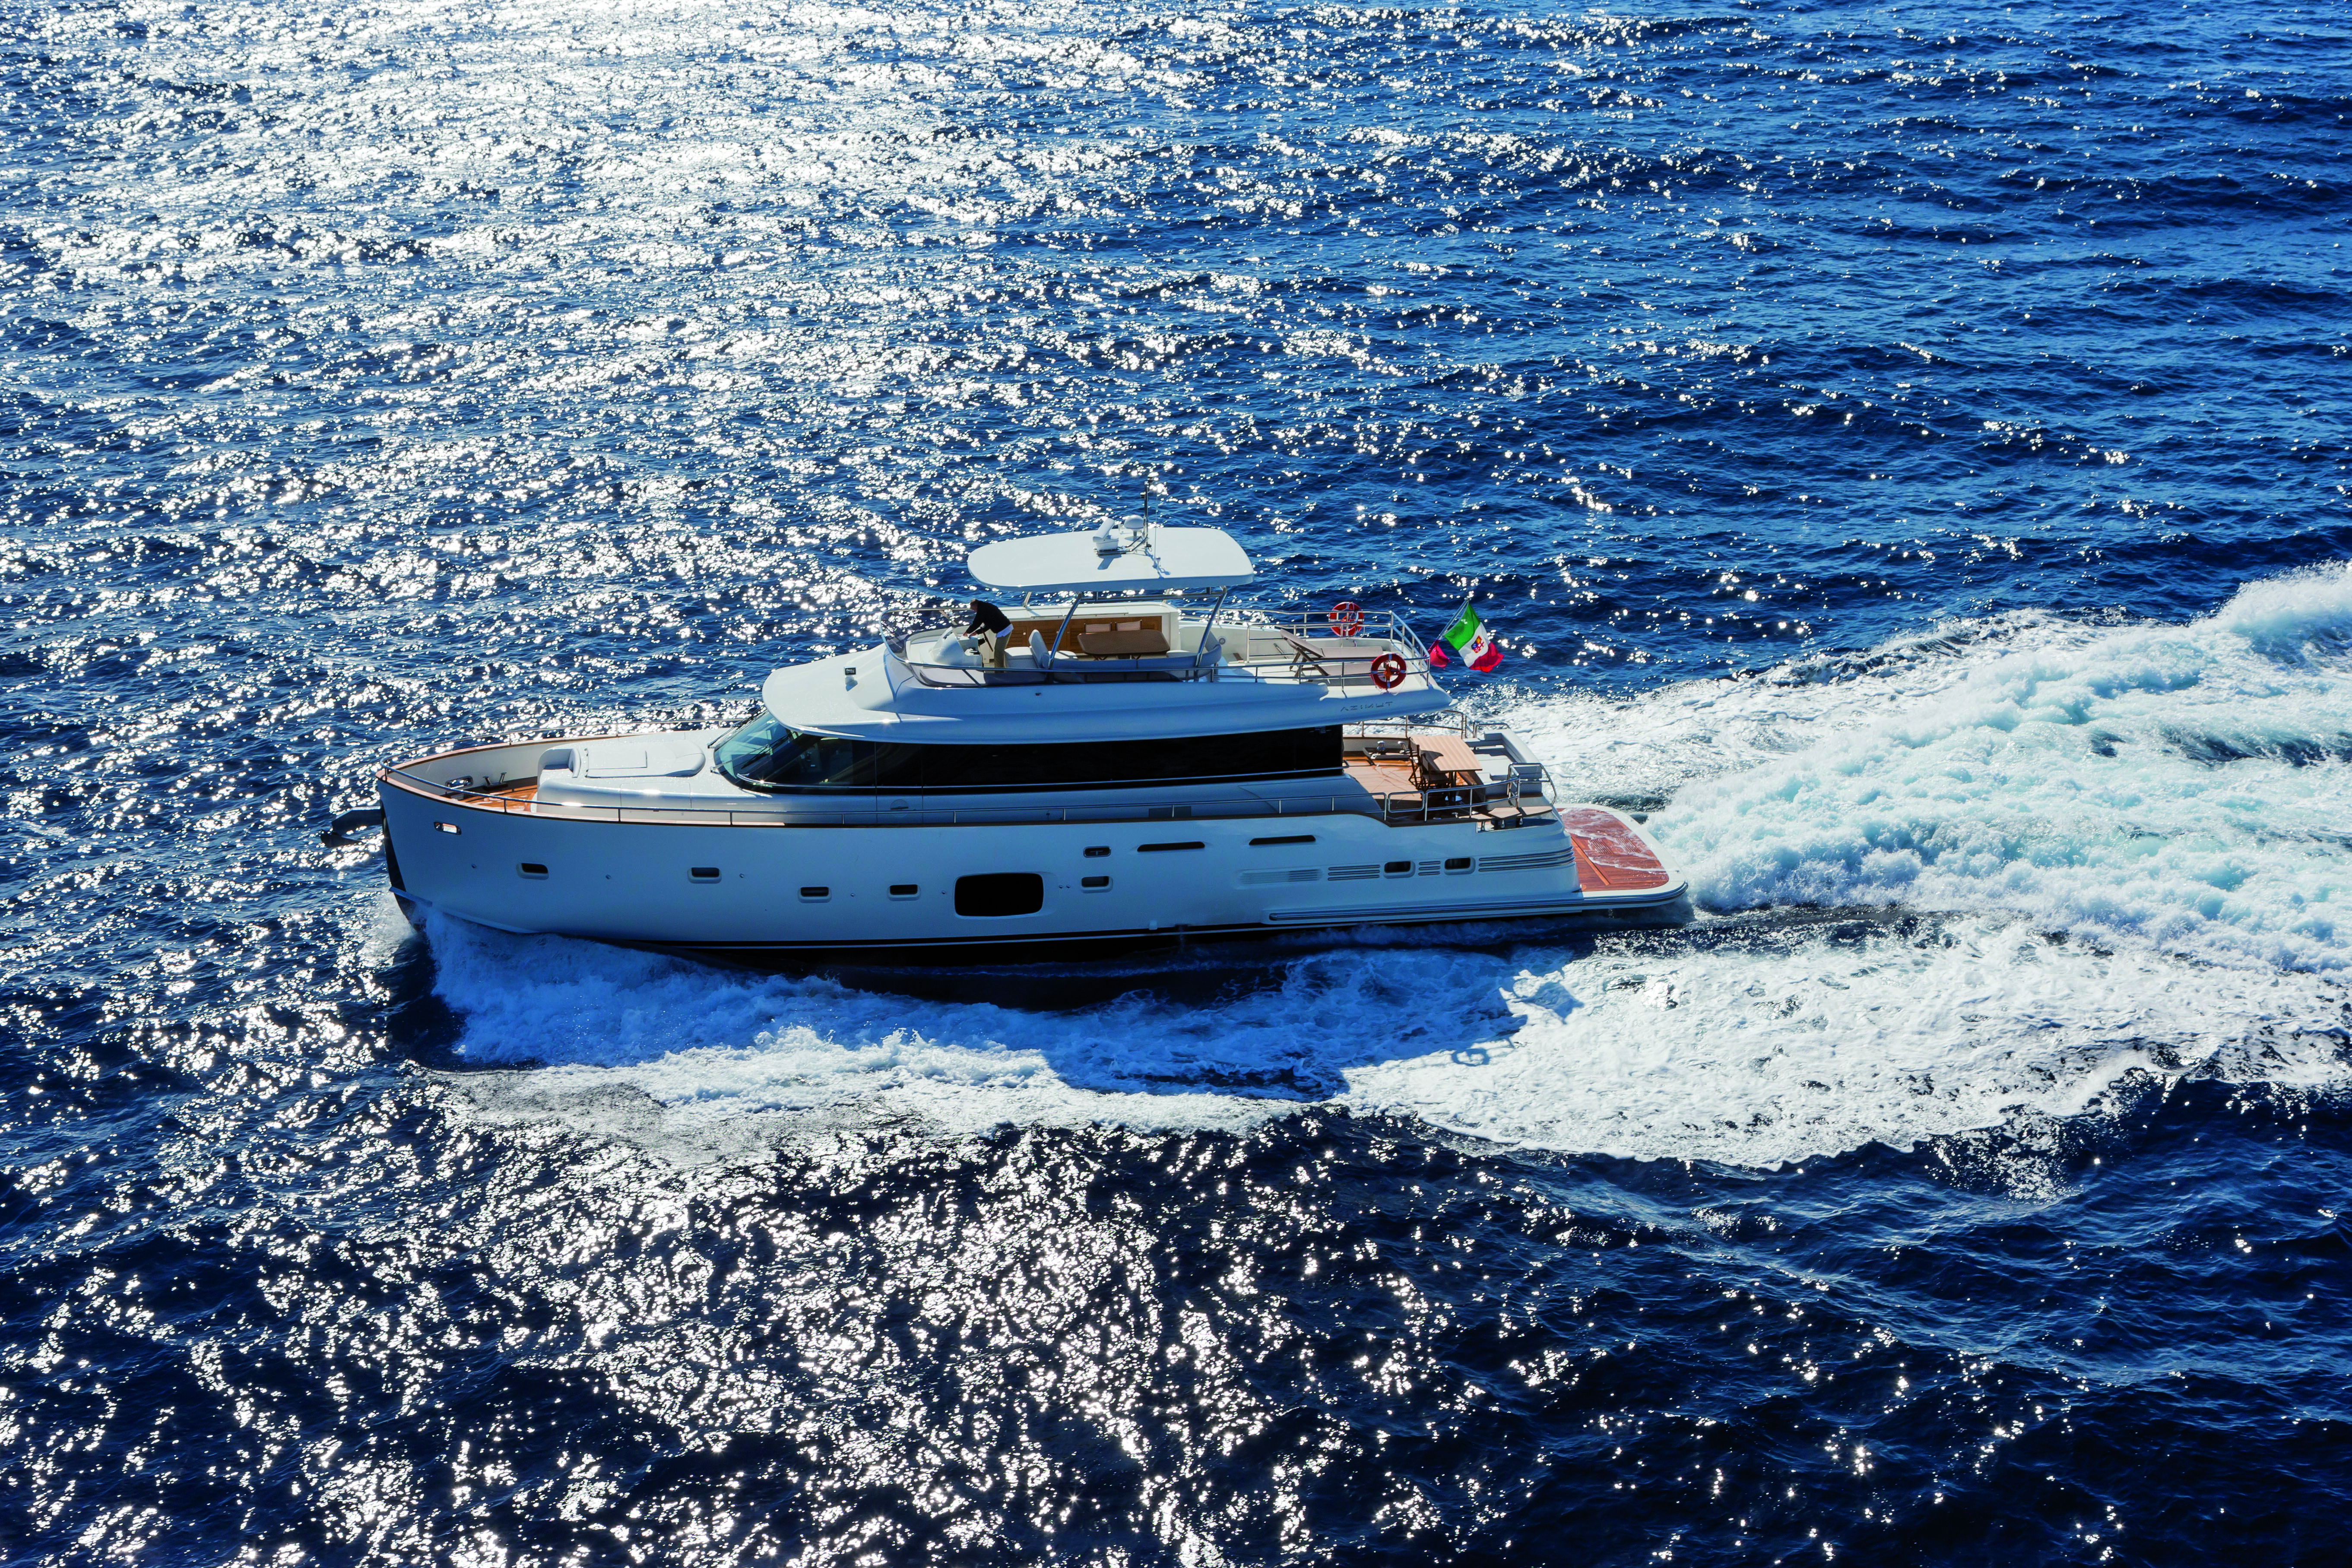 Azimut magellano trawler boat out at sea traveling to a destination